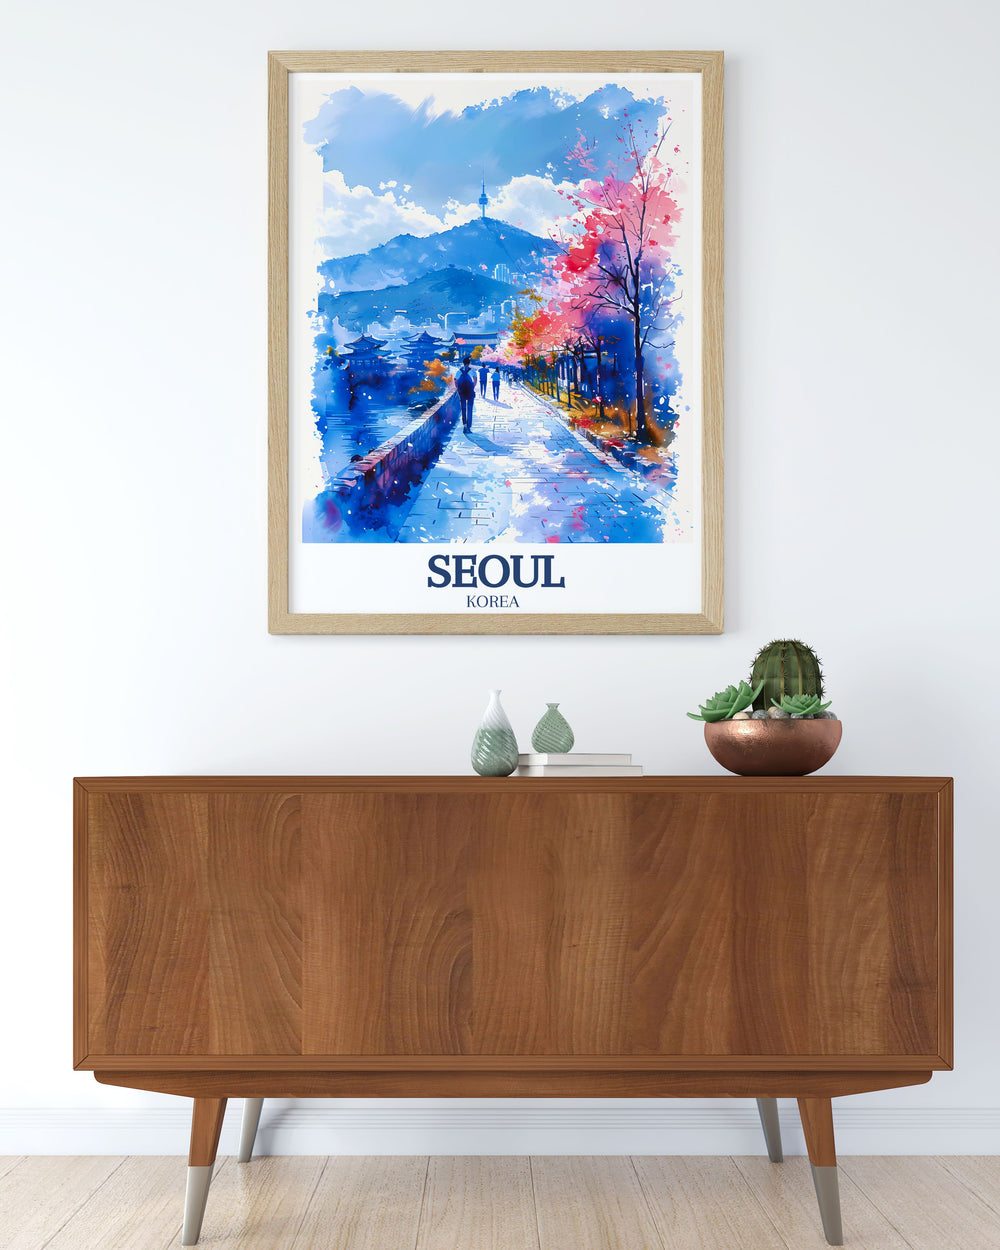 Stunning Seoul Art Print showcasing N Seoul Tower and Bukchon Hanok Village perfect for adding a touch of South Korean heritage to your home decor ideal for anniversary gifts birthday gifts and Christmas gifts a stylish addition to any living space